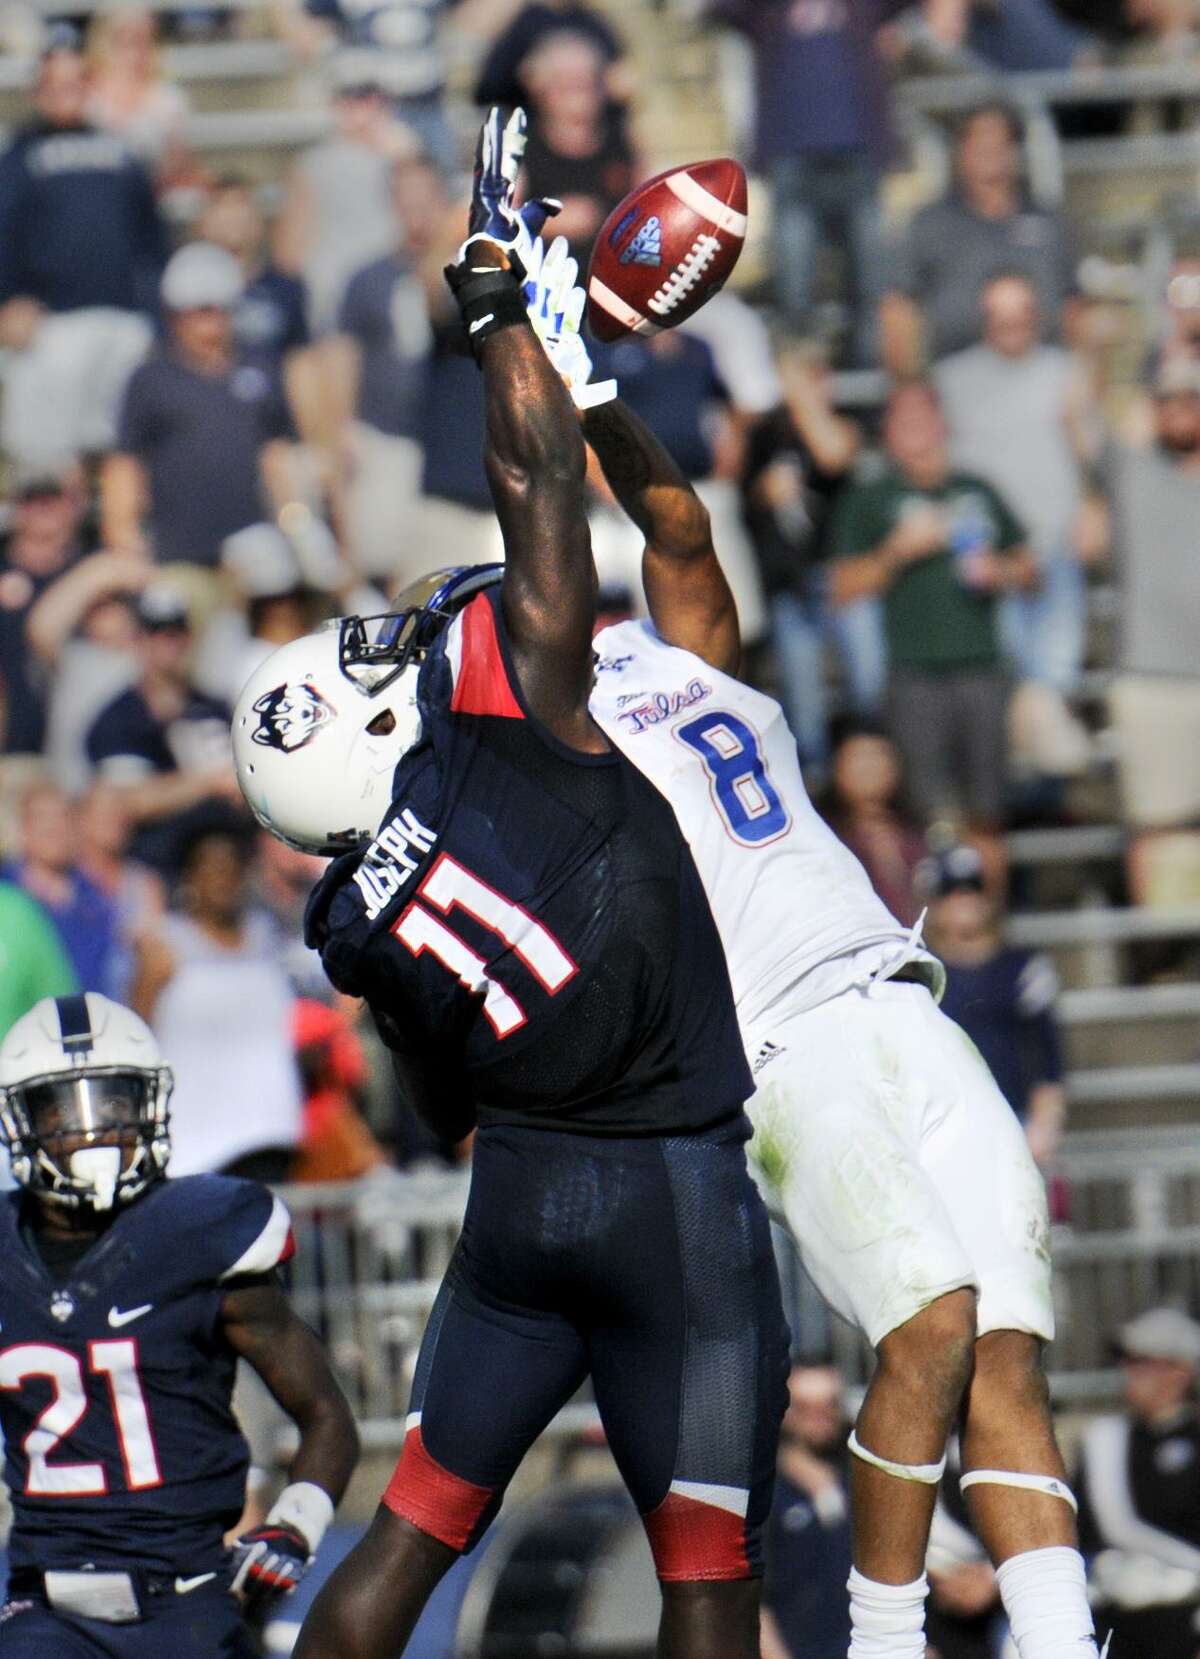 UConn linebacker Junior Joseph breaks up a pass intended for Tulsa wide receiver Keenen Johnson in the final seconds Oct. 21 in East Hartford.